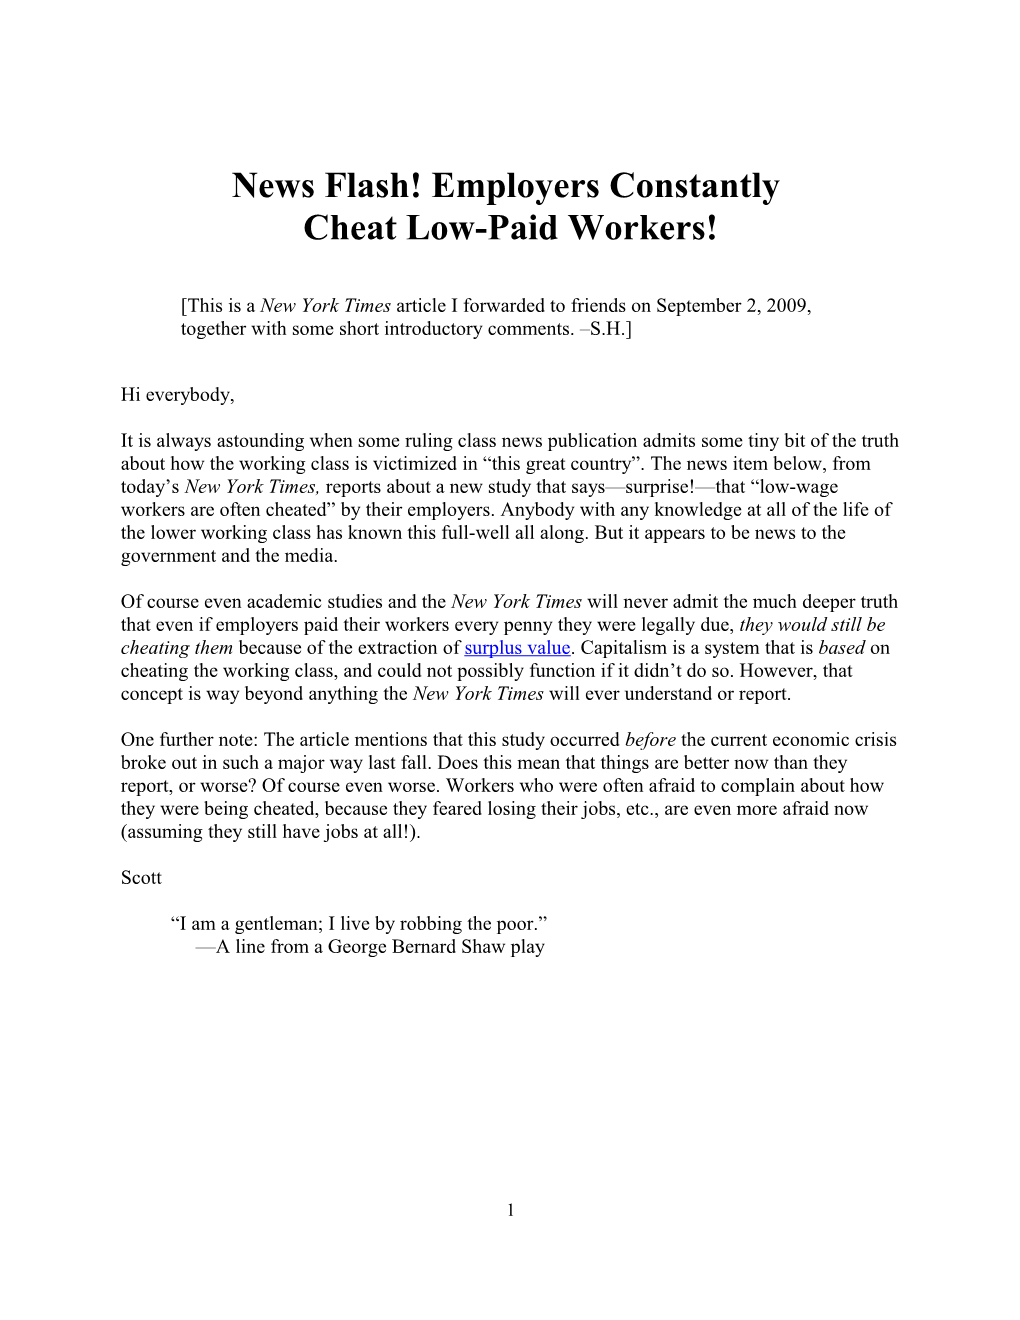 News Flash! Employers Constantly